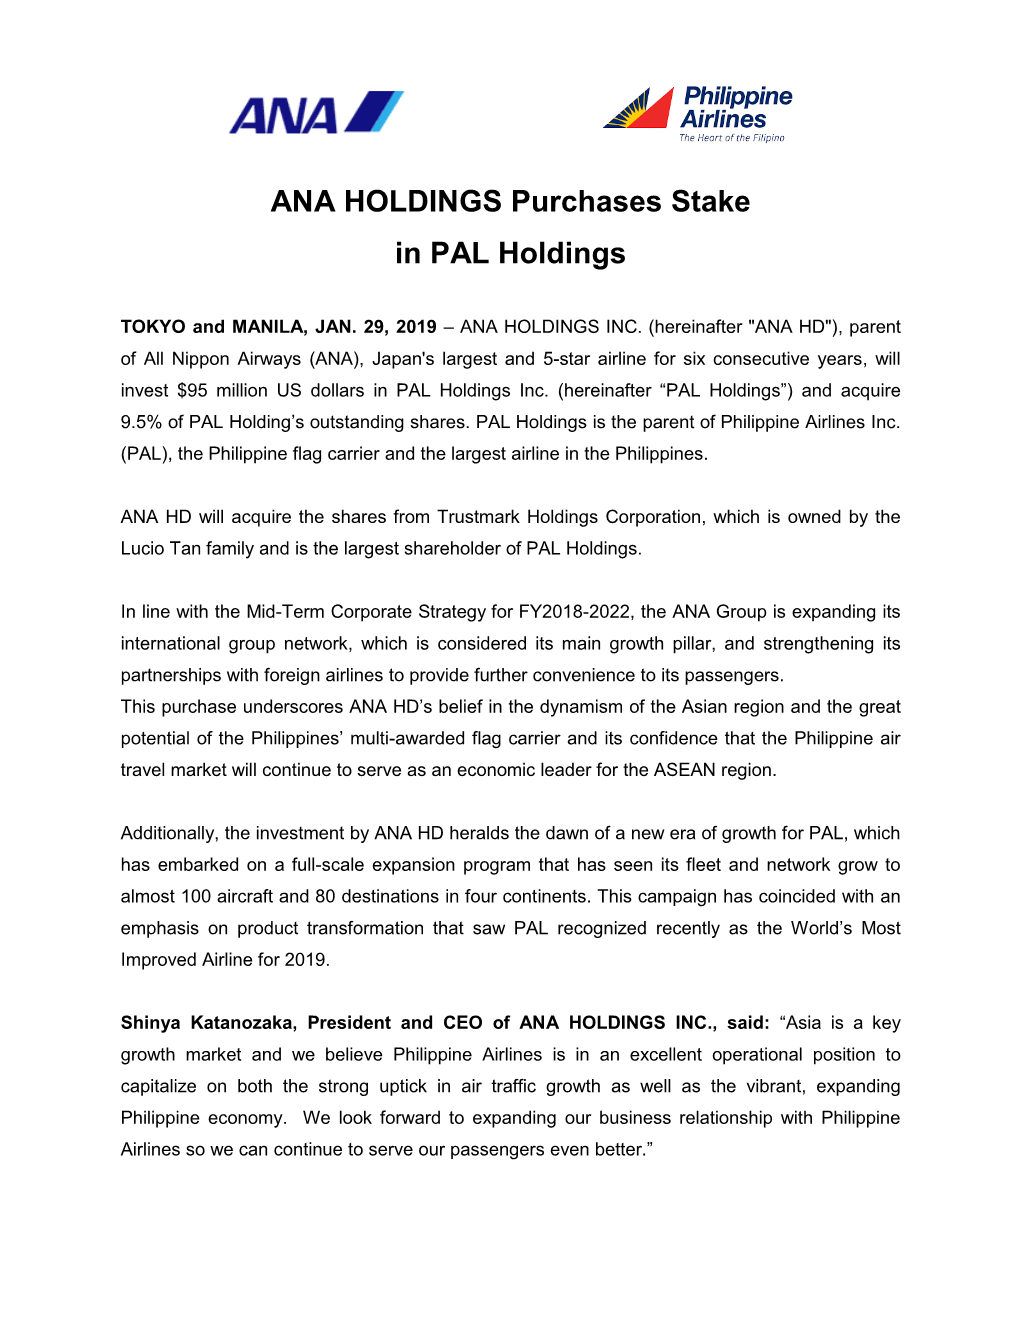 ANA HOLDINGS Purchases Stake in PAL Holdings